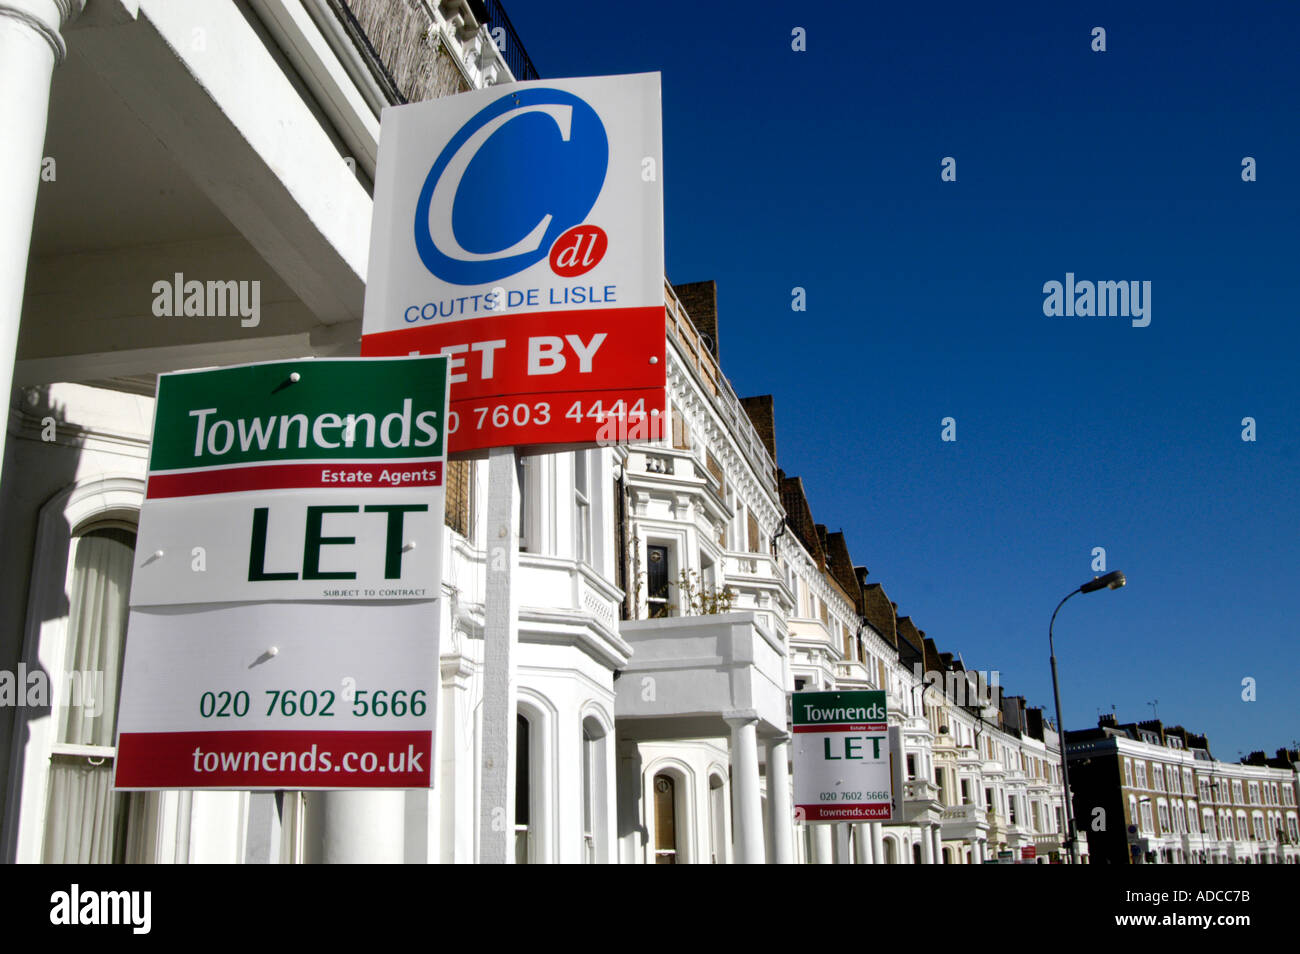 To Let property signs in residential street, London England UK Stock Photo